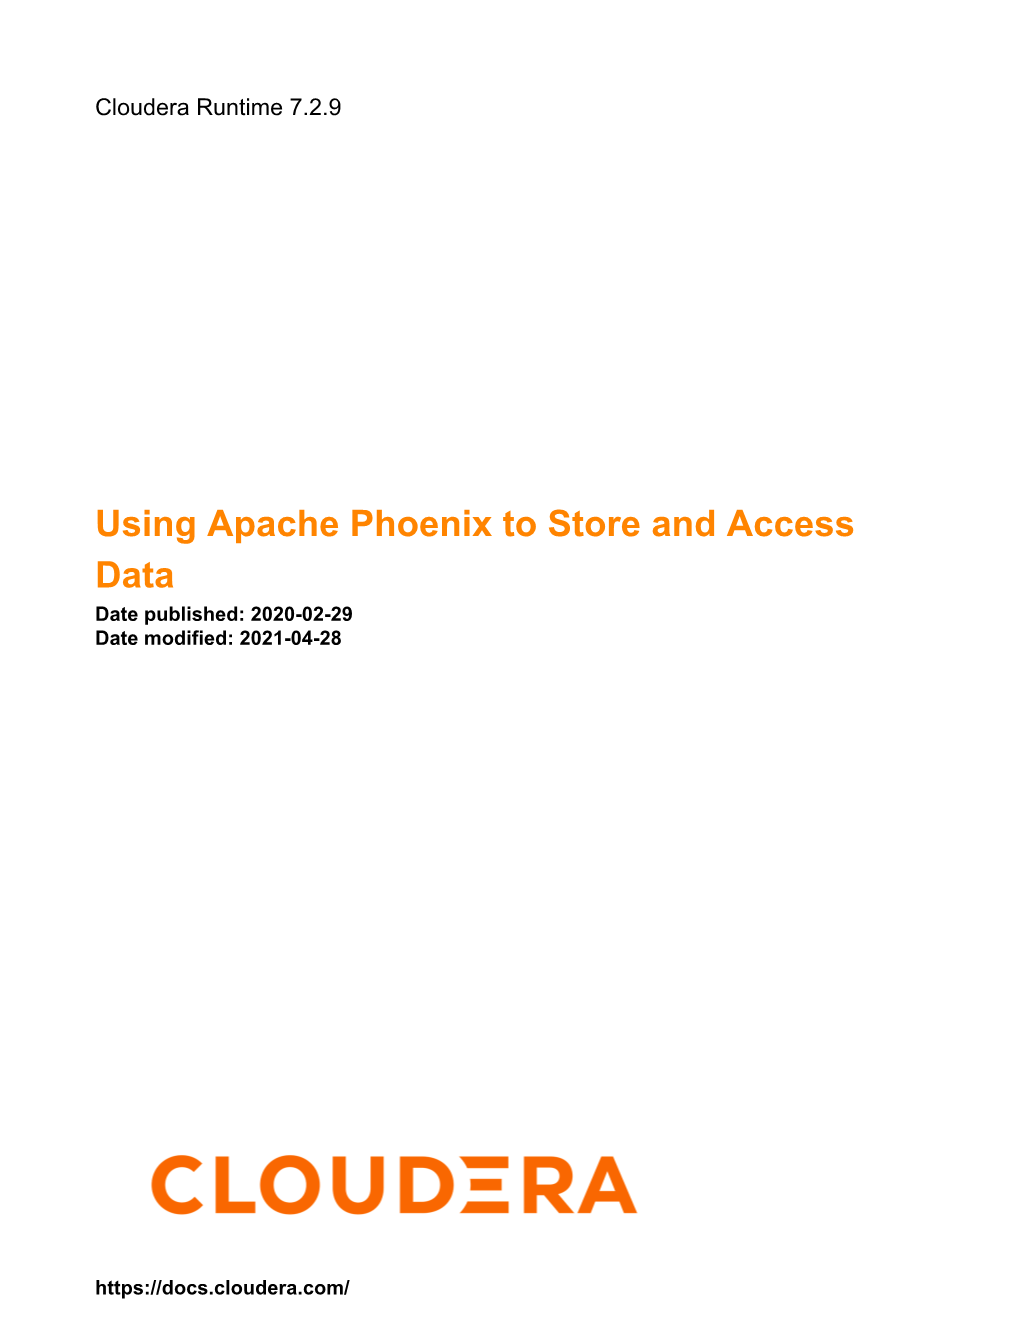 Using Apache Phoenix to Store and Access Data Date Published: 2020-02-29 Date Modified: 2021-04-28